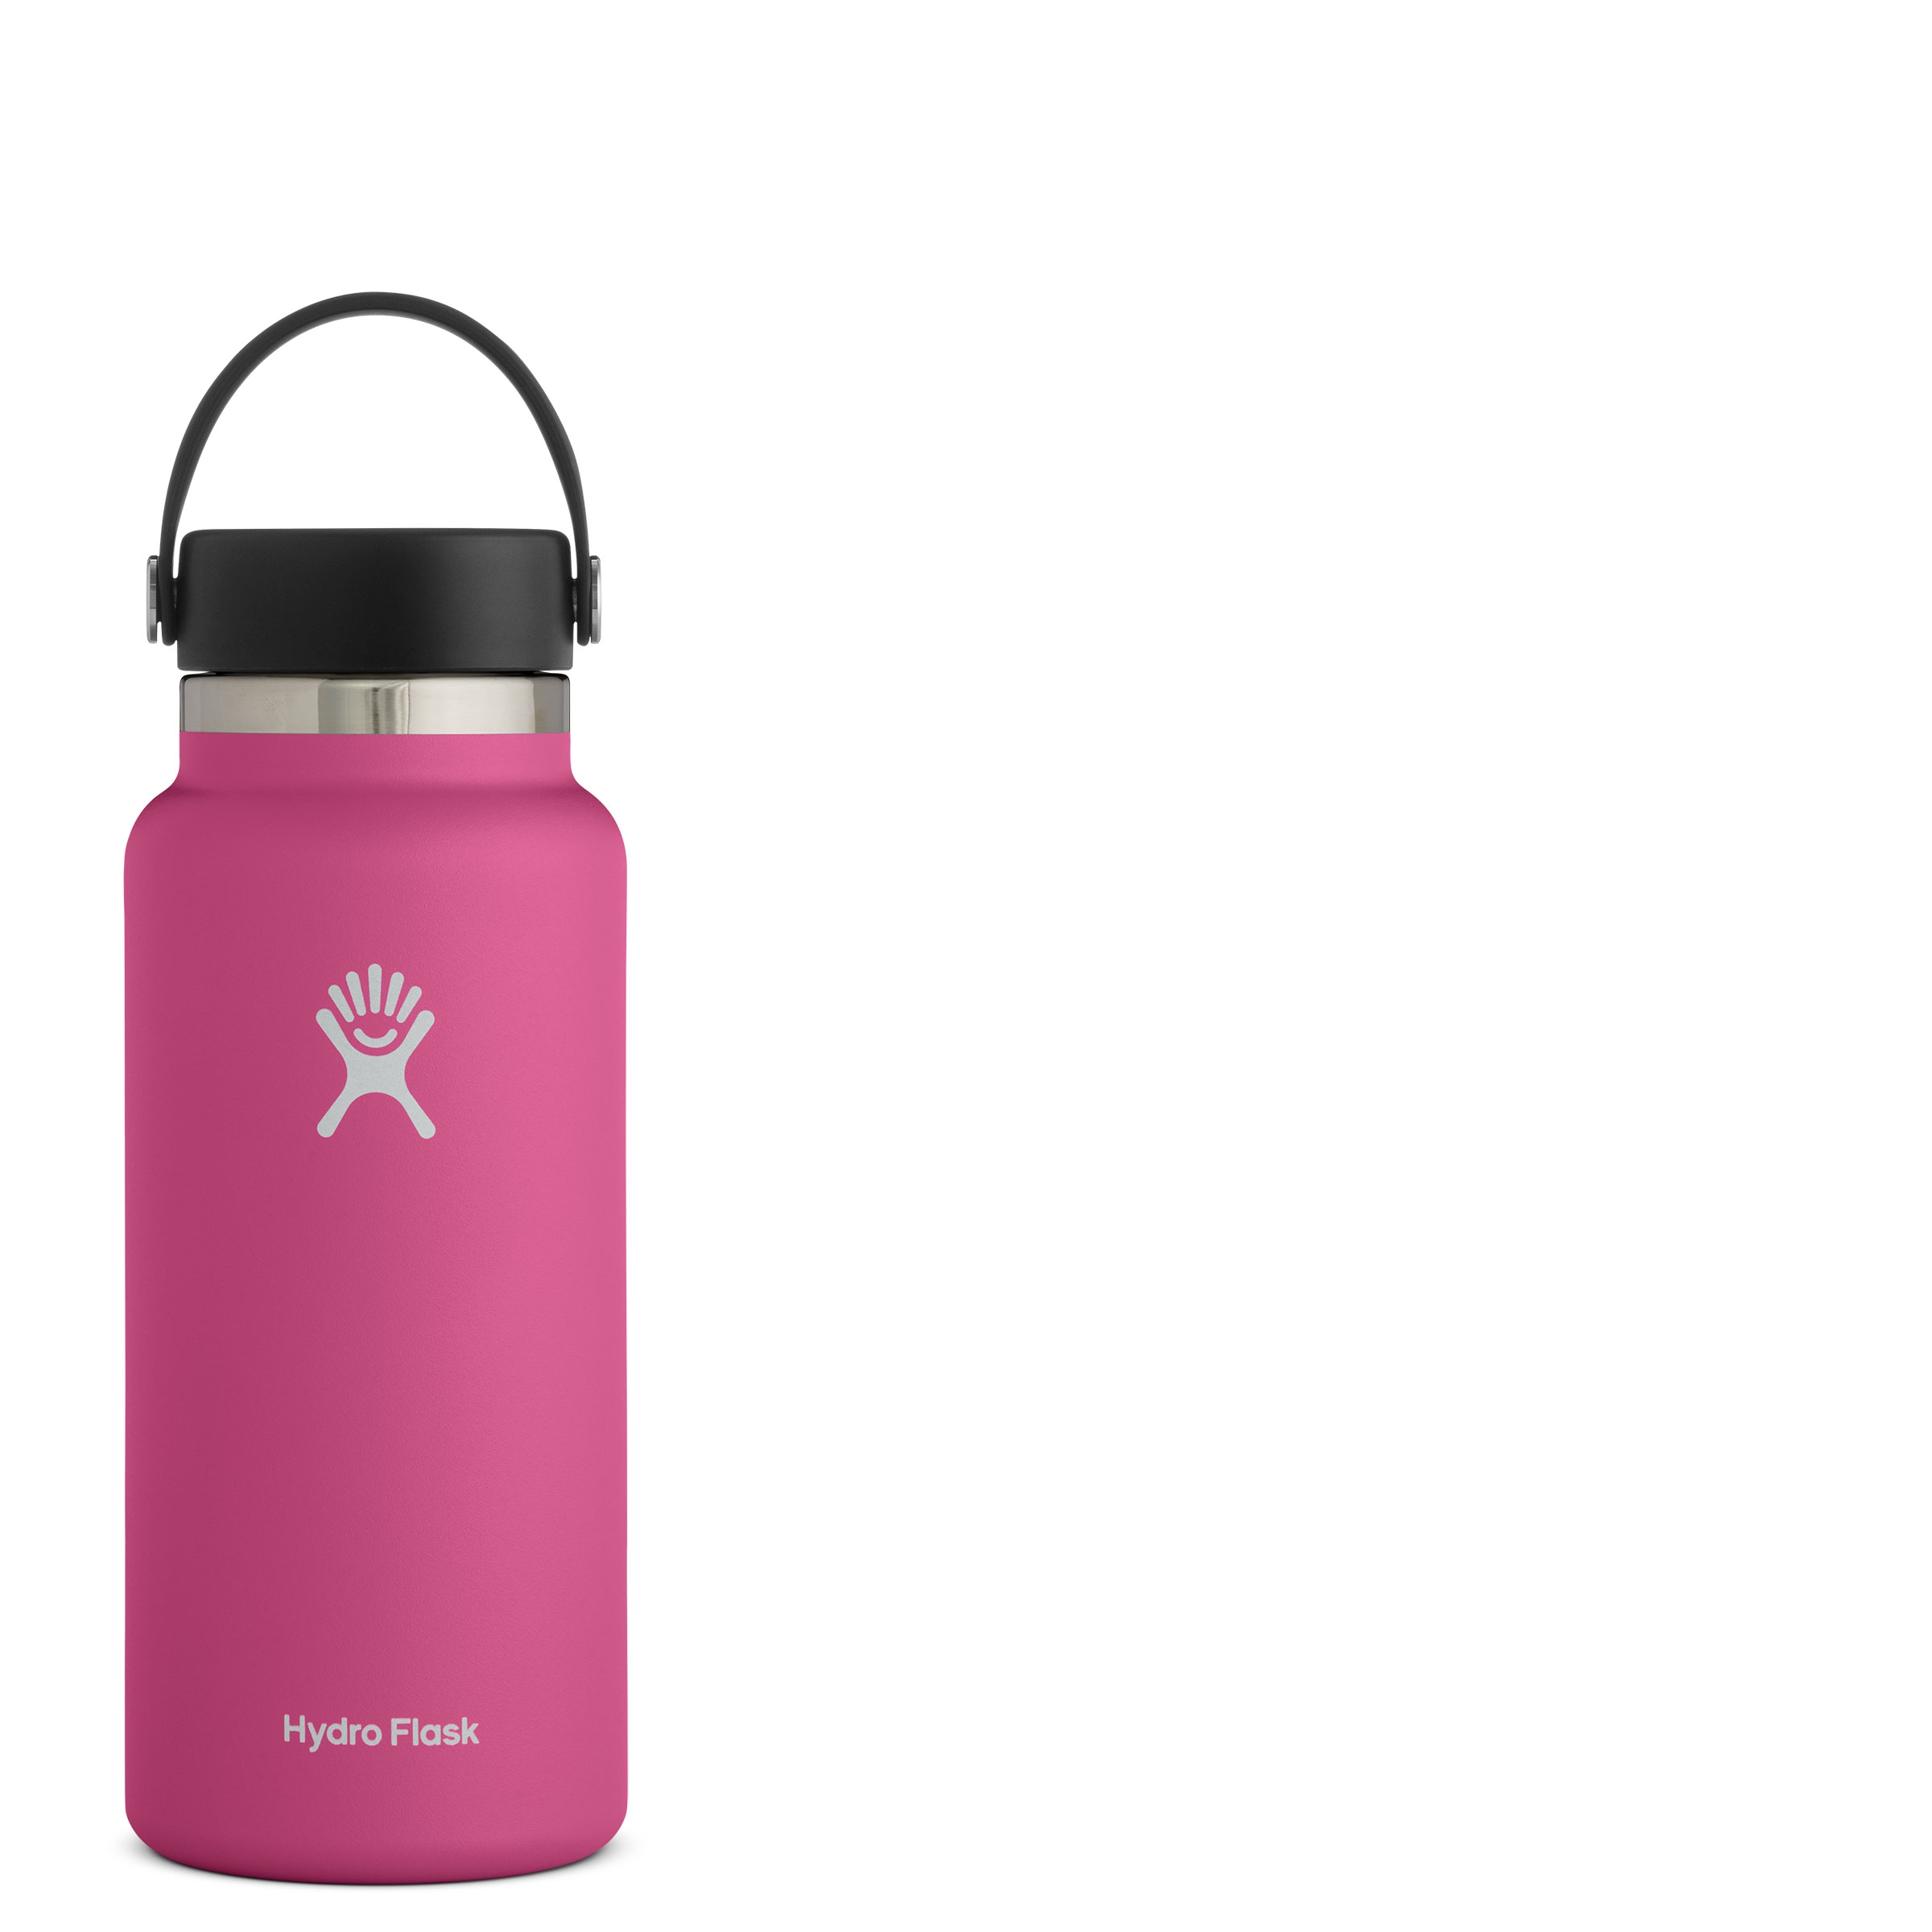 Hydroflask 32oz Wide Mouth with Flex Cap 2.0